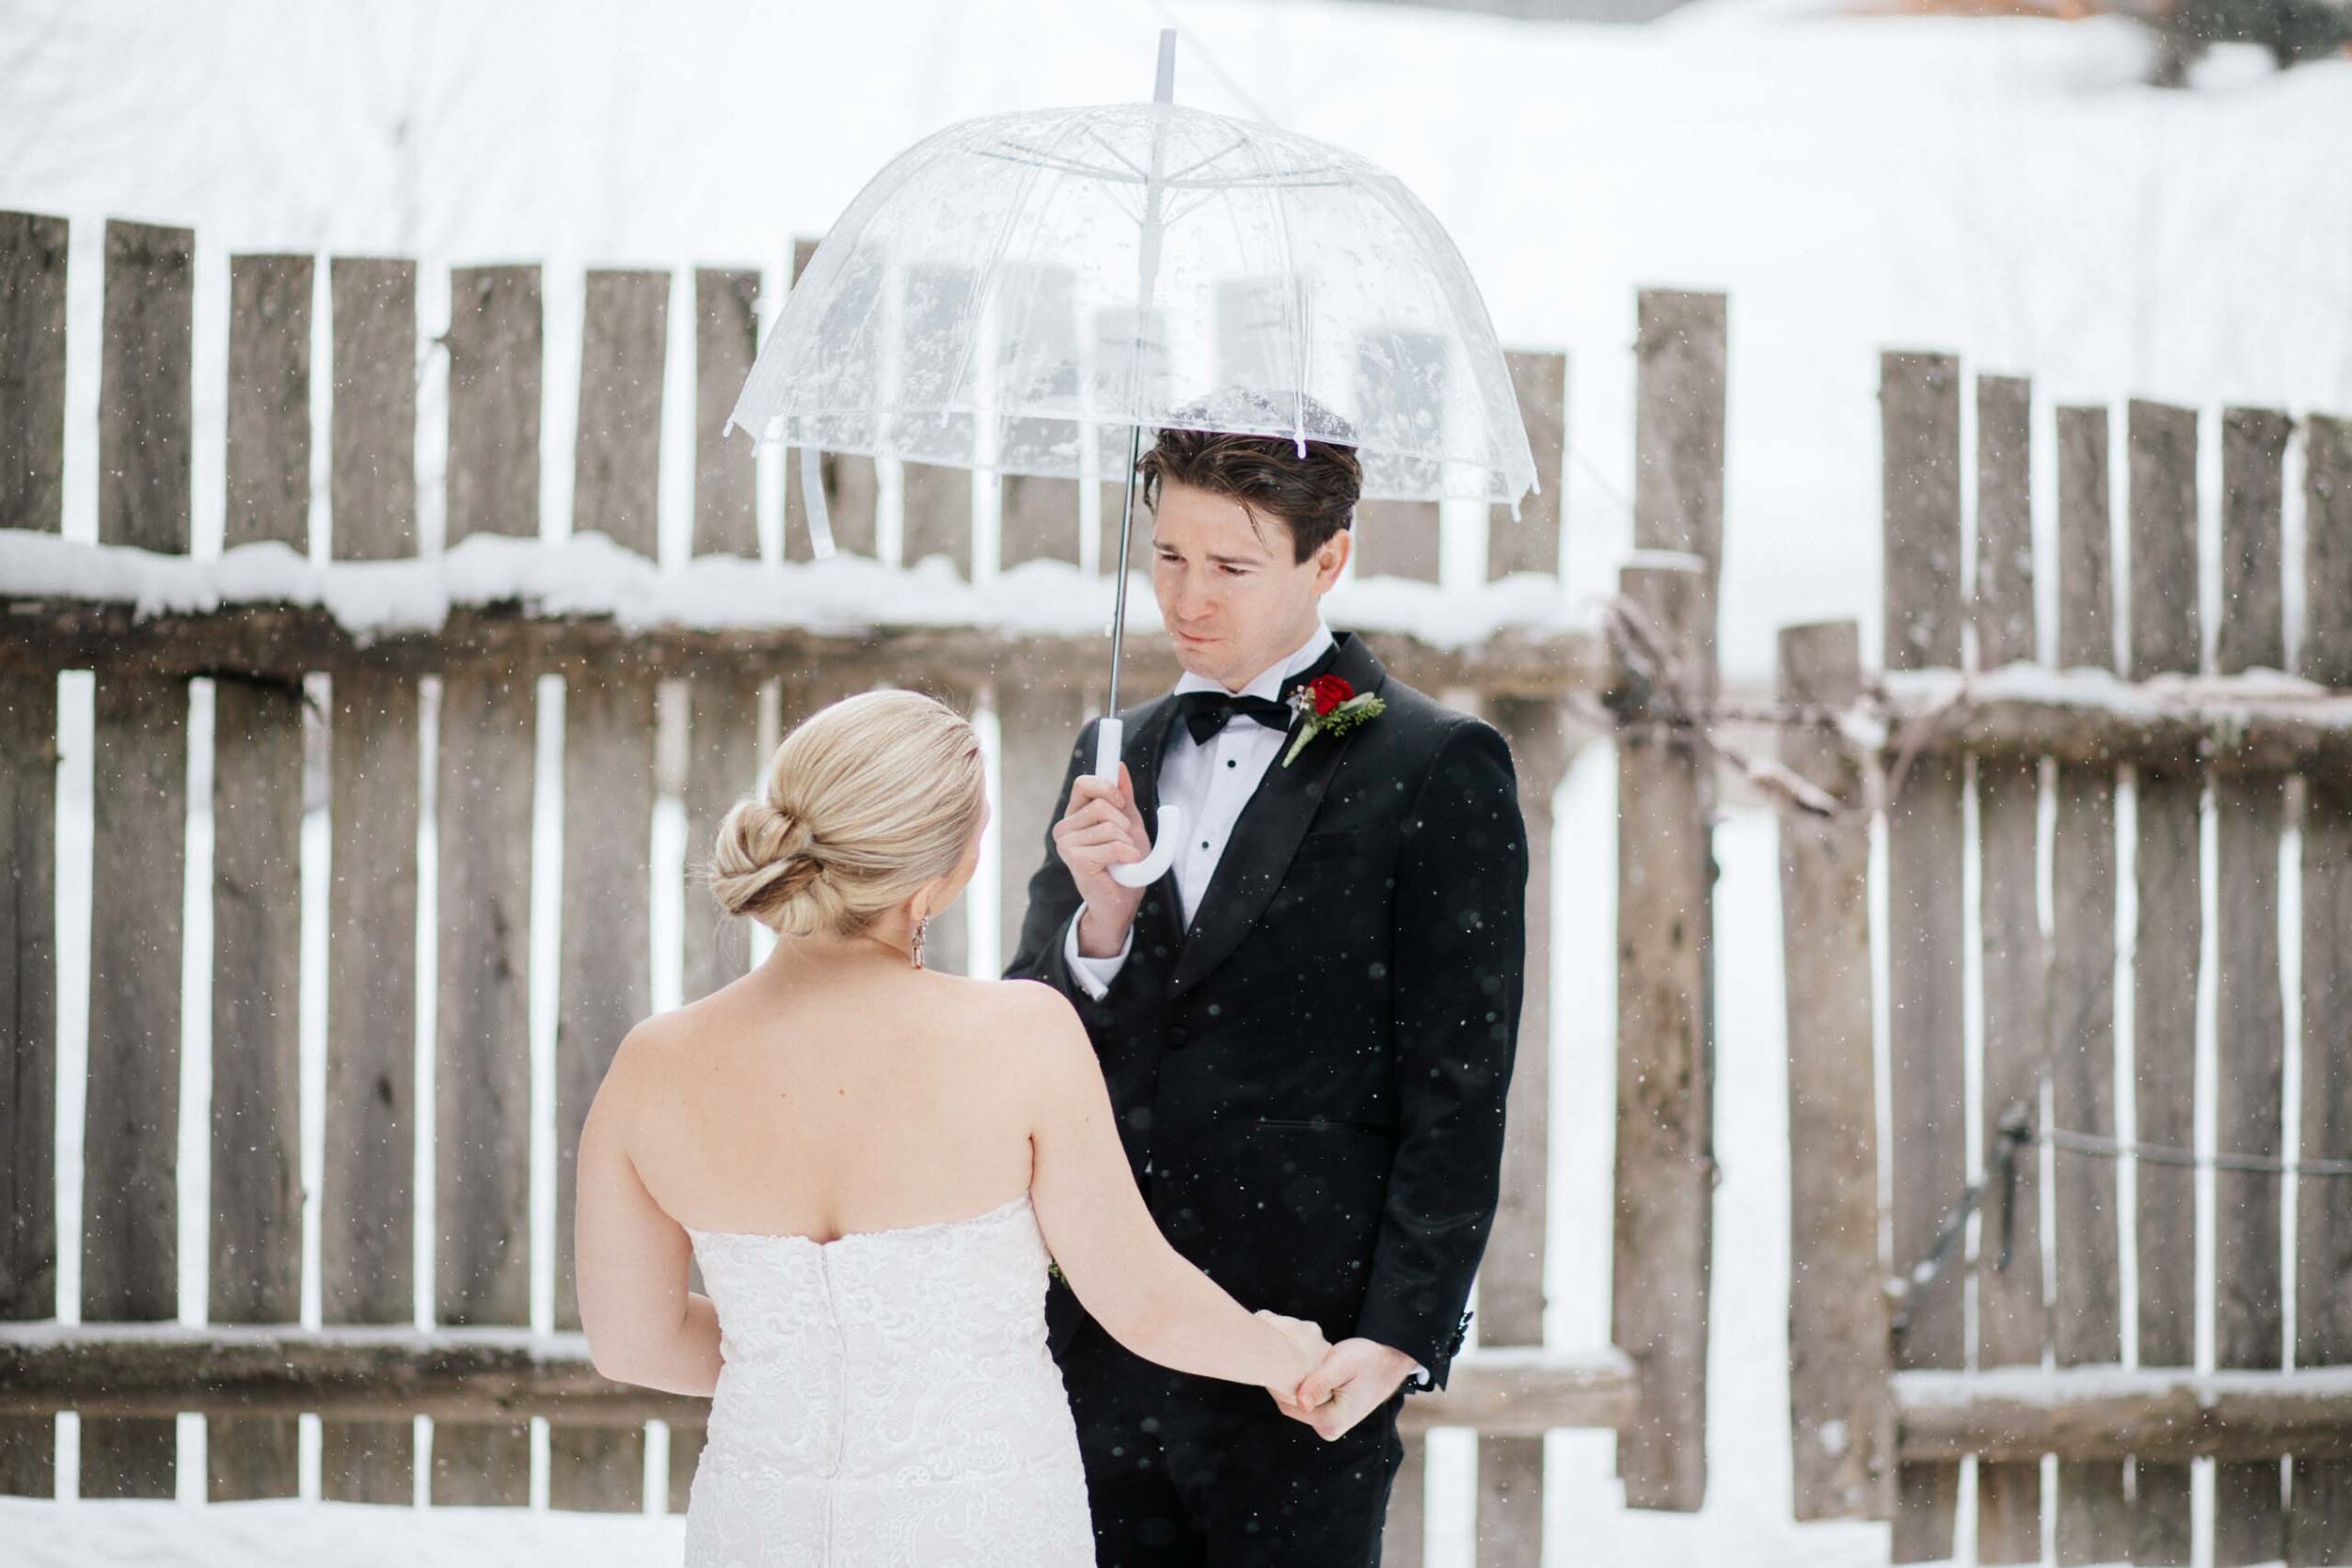 An emotion groom holds his brides hand as they stand in the snow in Whistler, BC.